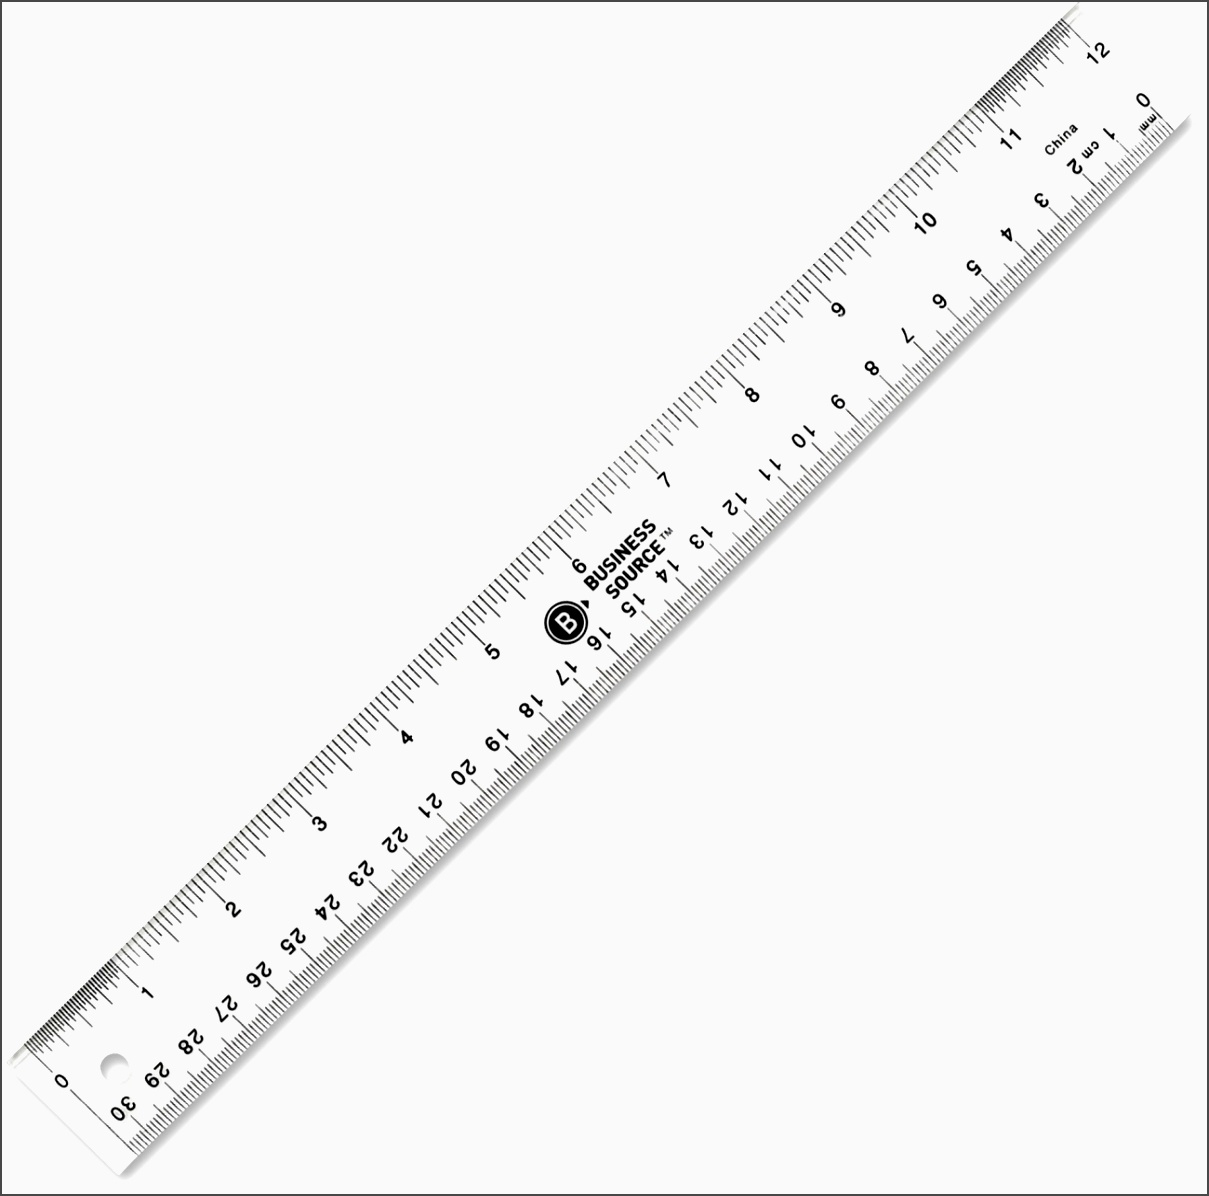 3 16 Scale Ruler Printable Free Printable Ruler Actual Size